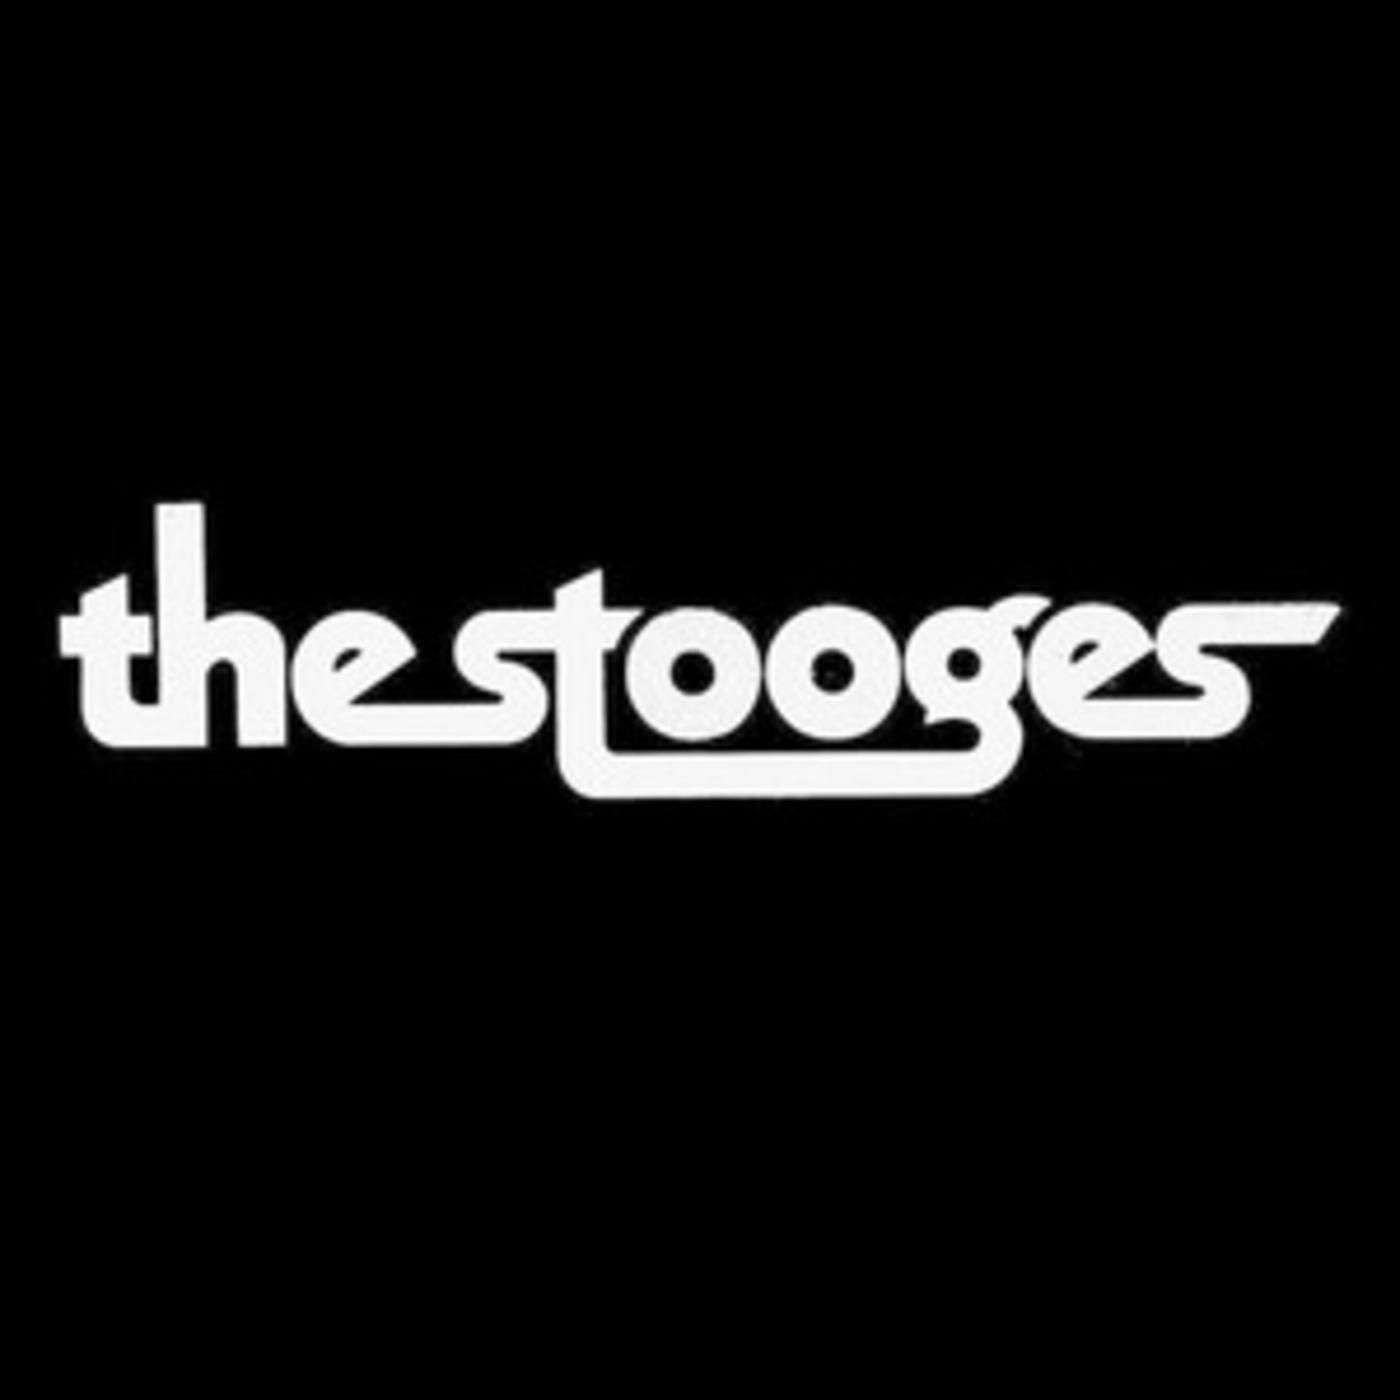 The Stooges - Official Playlist - I Wanna Be Your Dog, 1969, Down On The Street, Search And Destroy